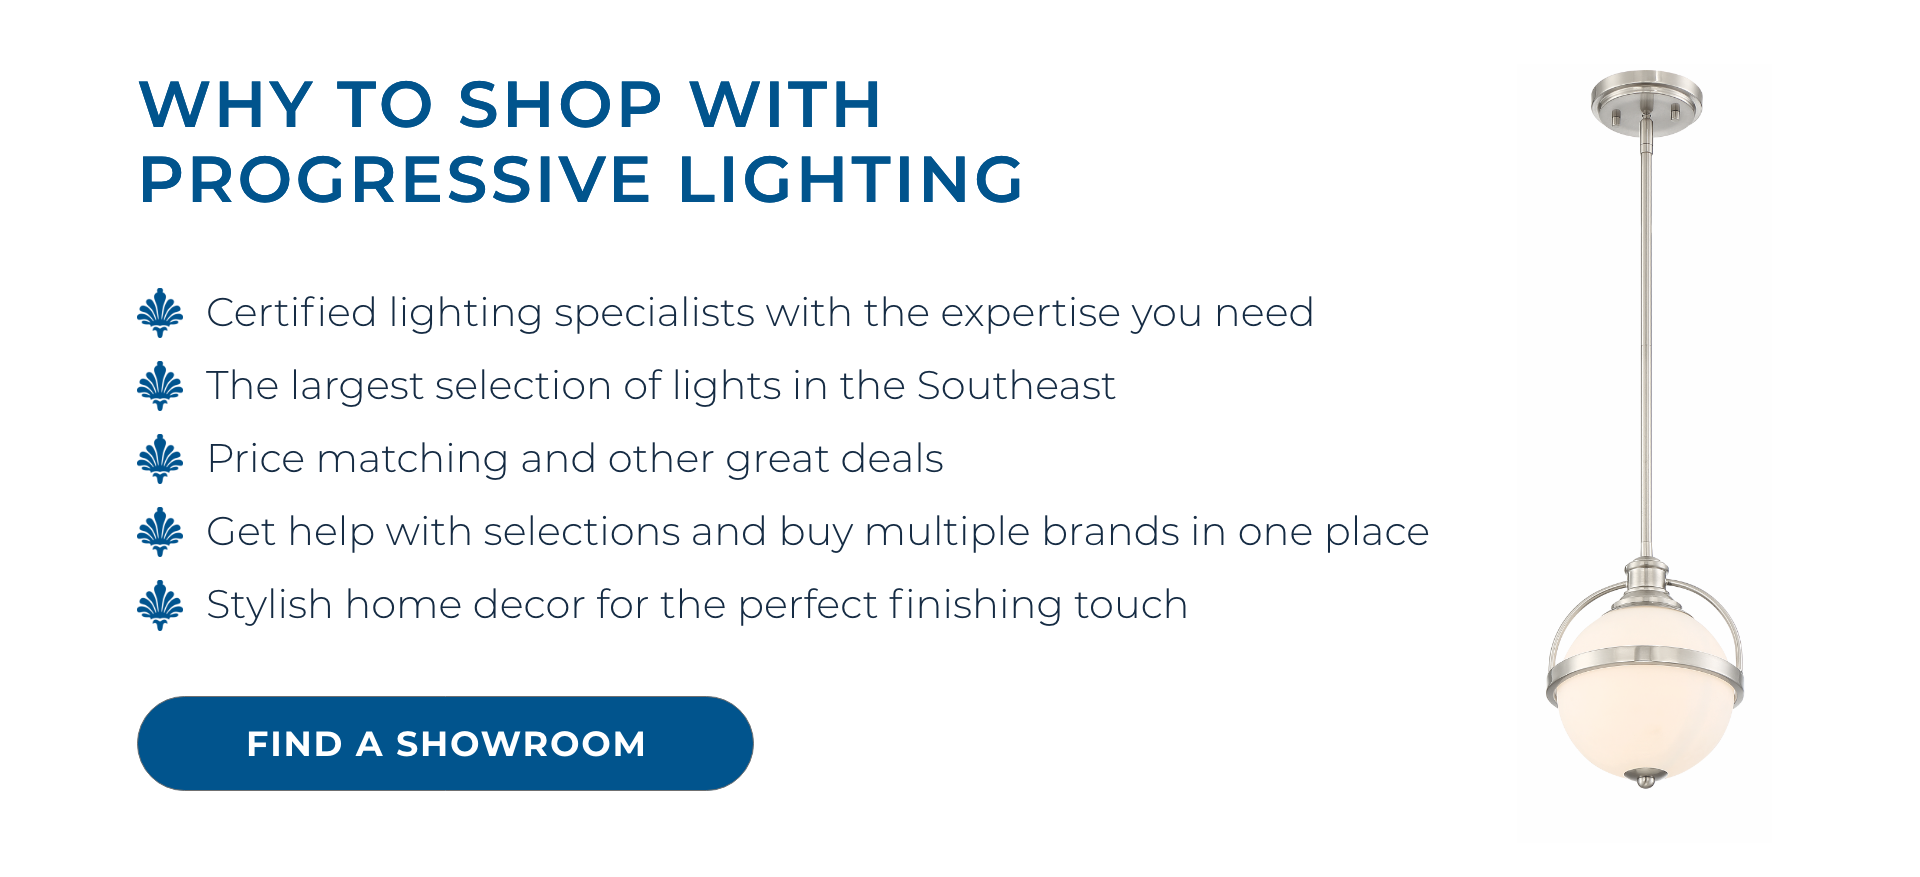 Why to shop with Progressive Lighting: Certified lighting specialists with the expertise you need. The largest selection of lights in the Southeast. Price matching and other great deals. Get help with selections and buy multiple brands in one place.